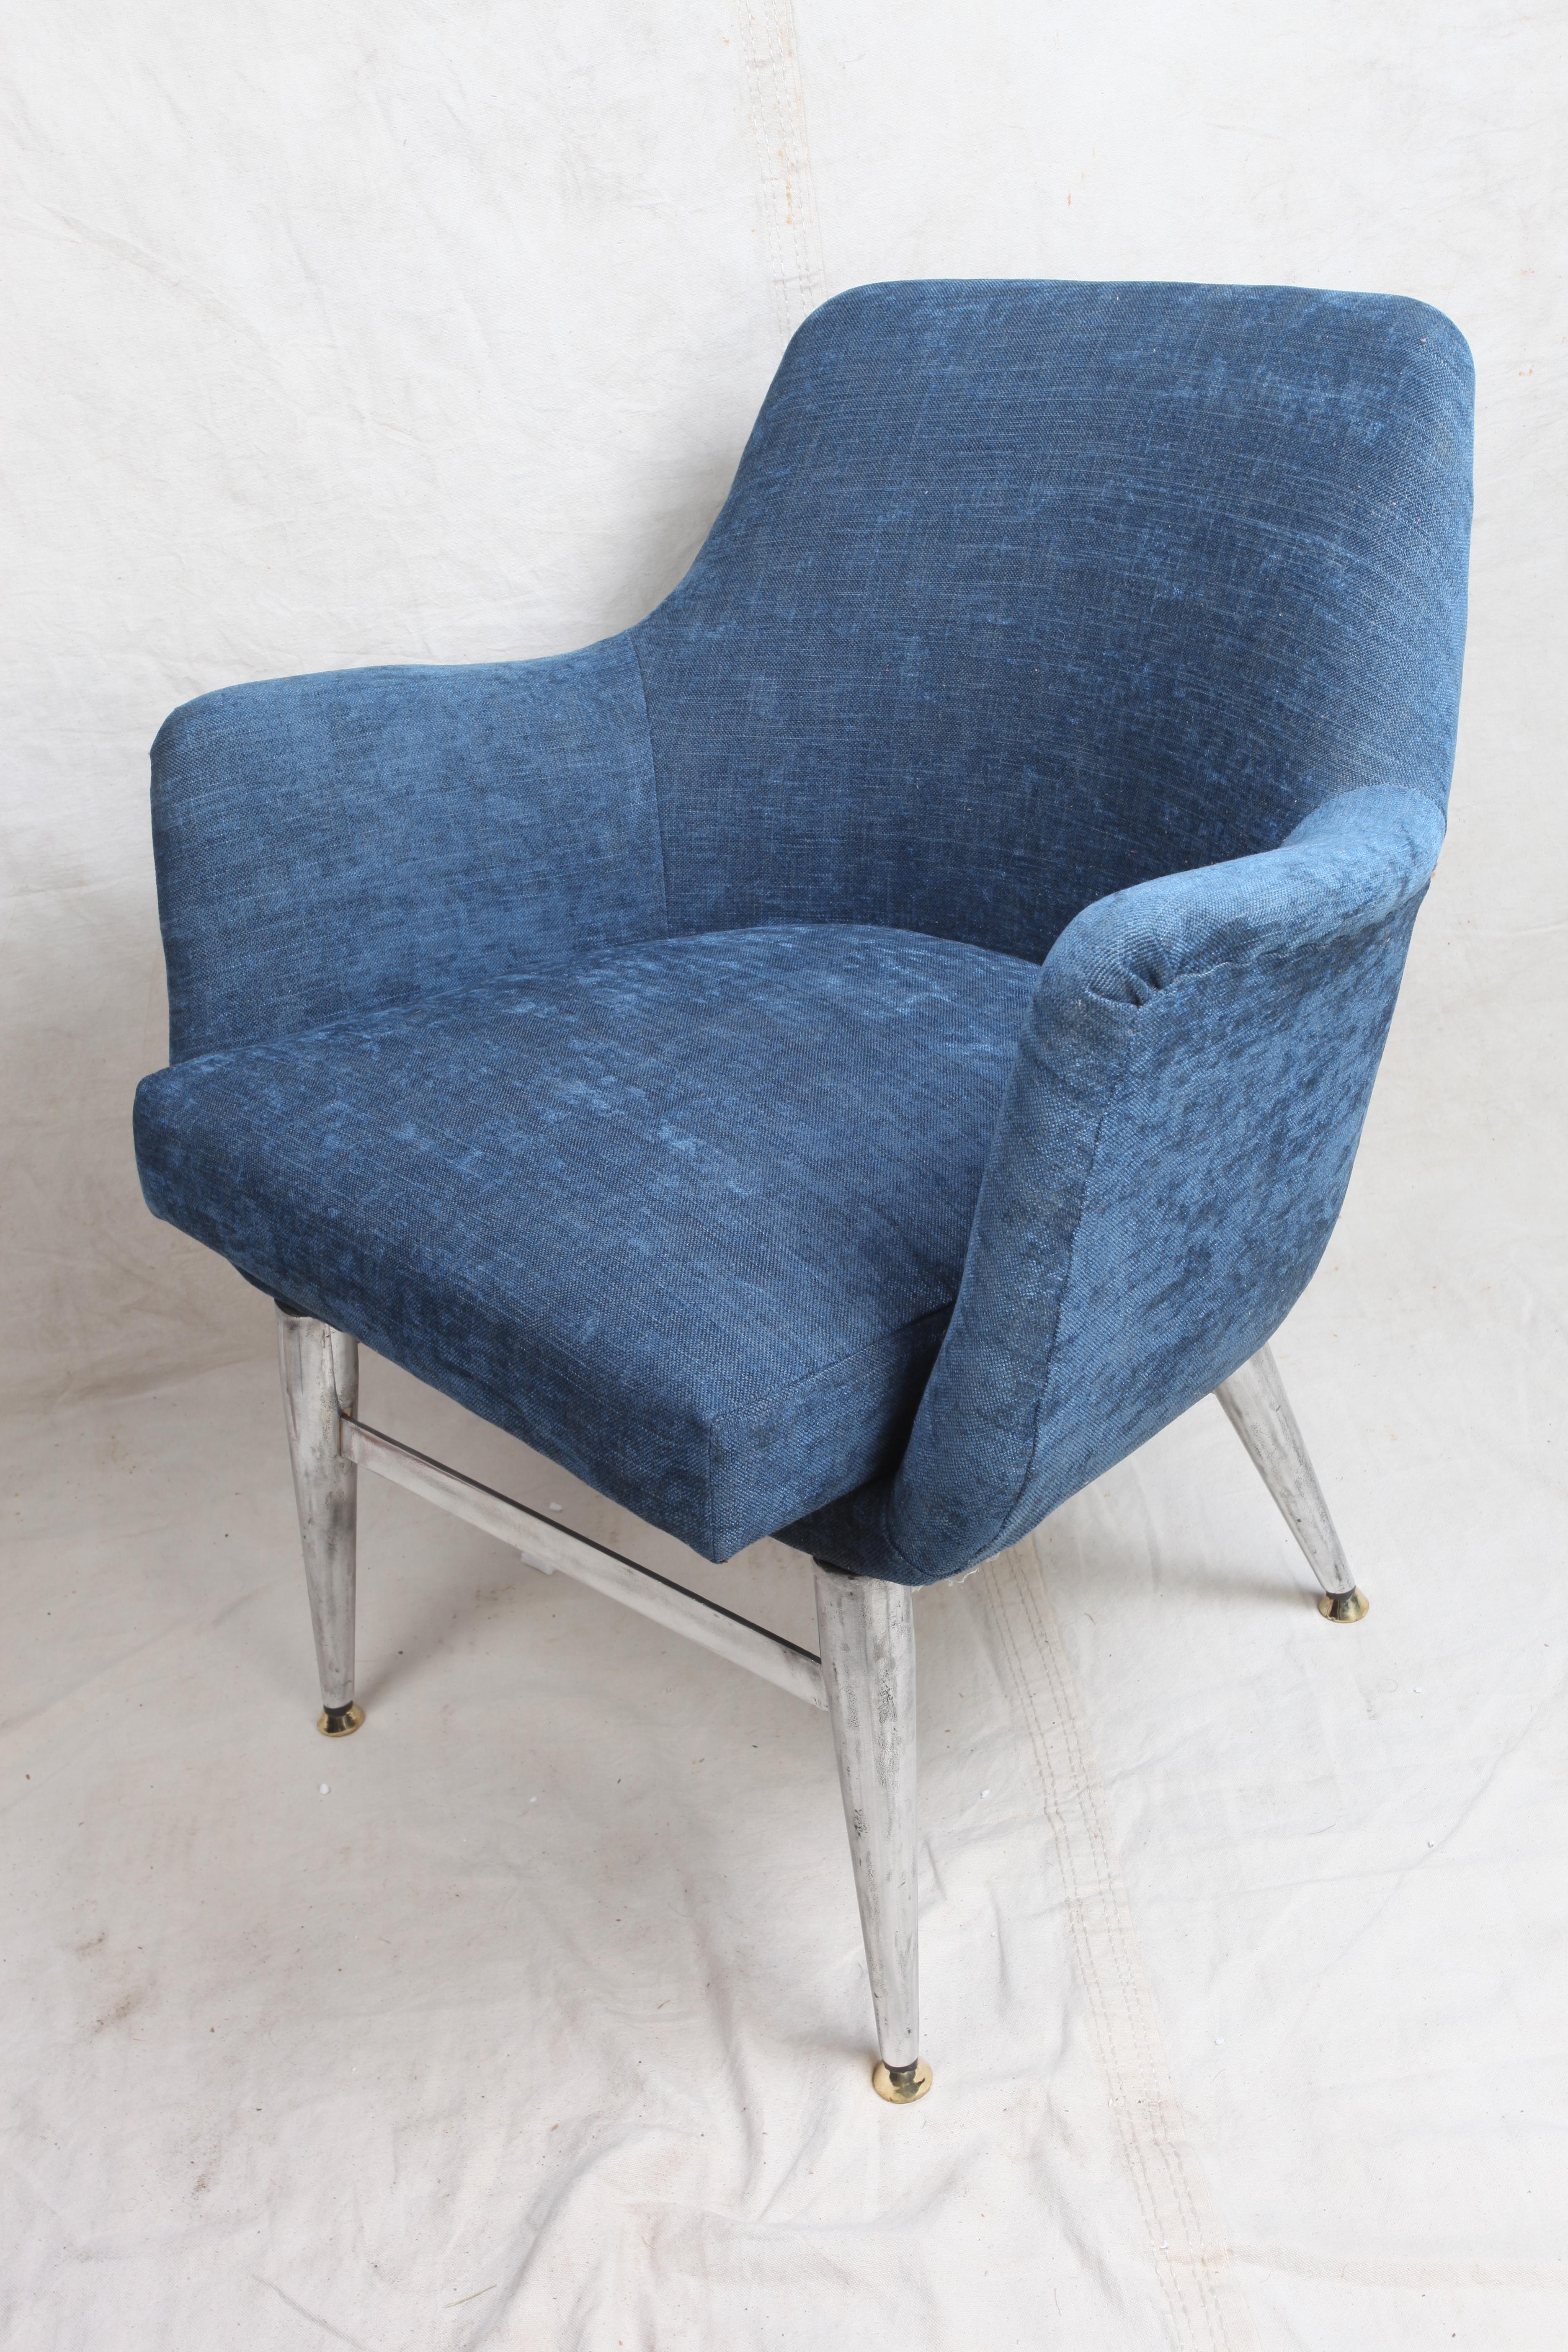 Pair of Mid-Century Modern arm chairs with chrome base and legs, and little brass feet. Reupholstered in a blue silk linen. Very comfortable and petite size. Seat cushion is fixed. European.